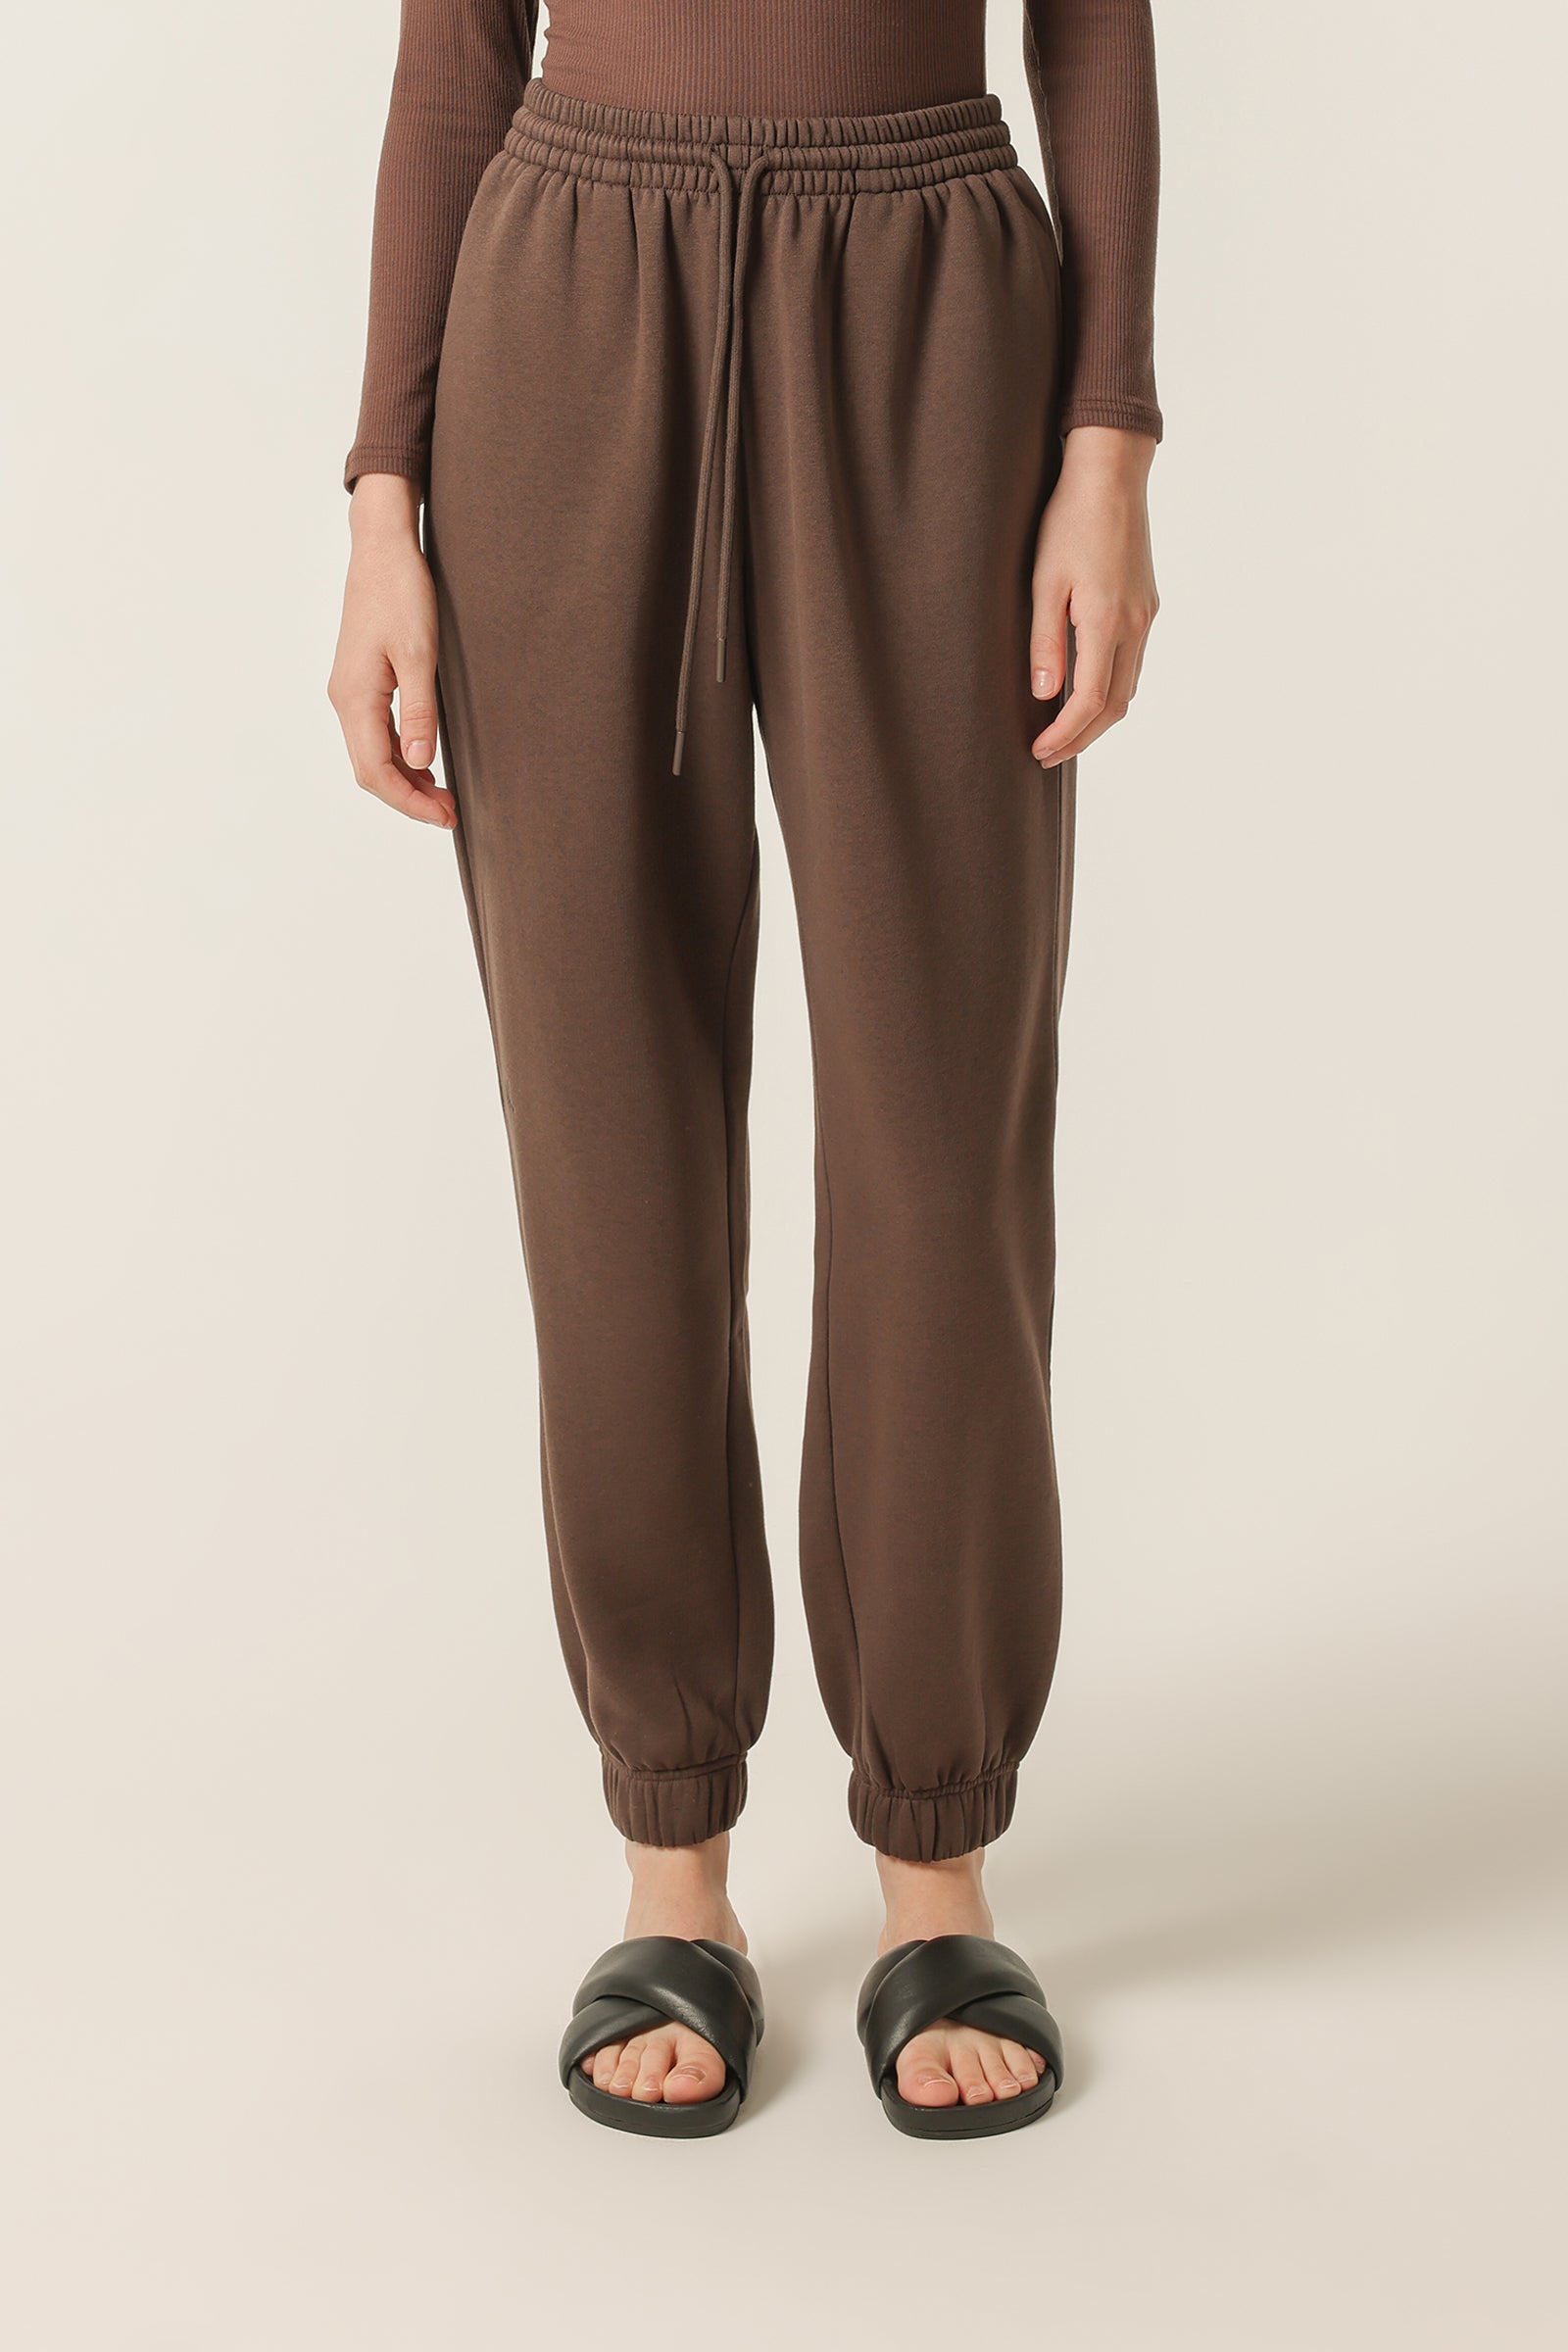 Nude Lucy Carter Curated Trackpant In a Deep Brown Bark Colour 